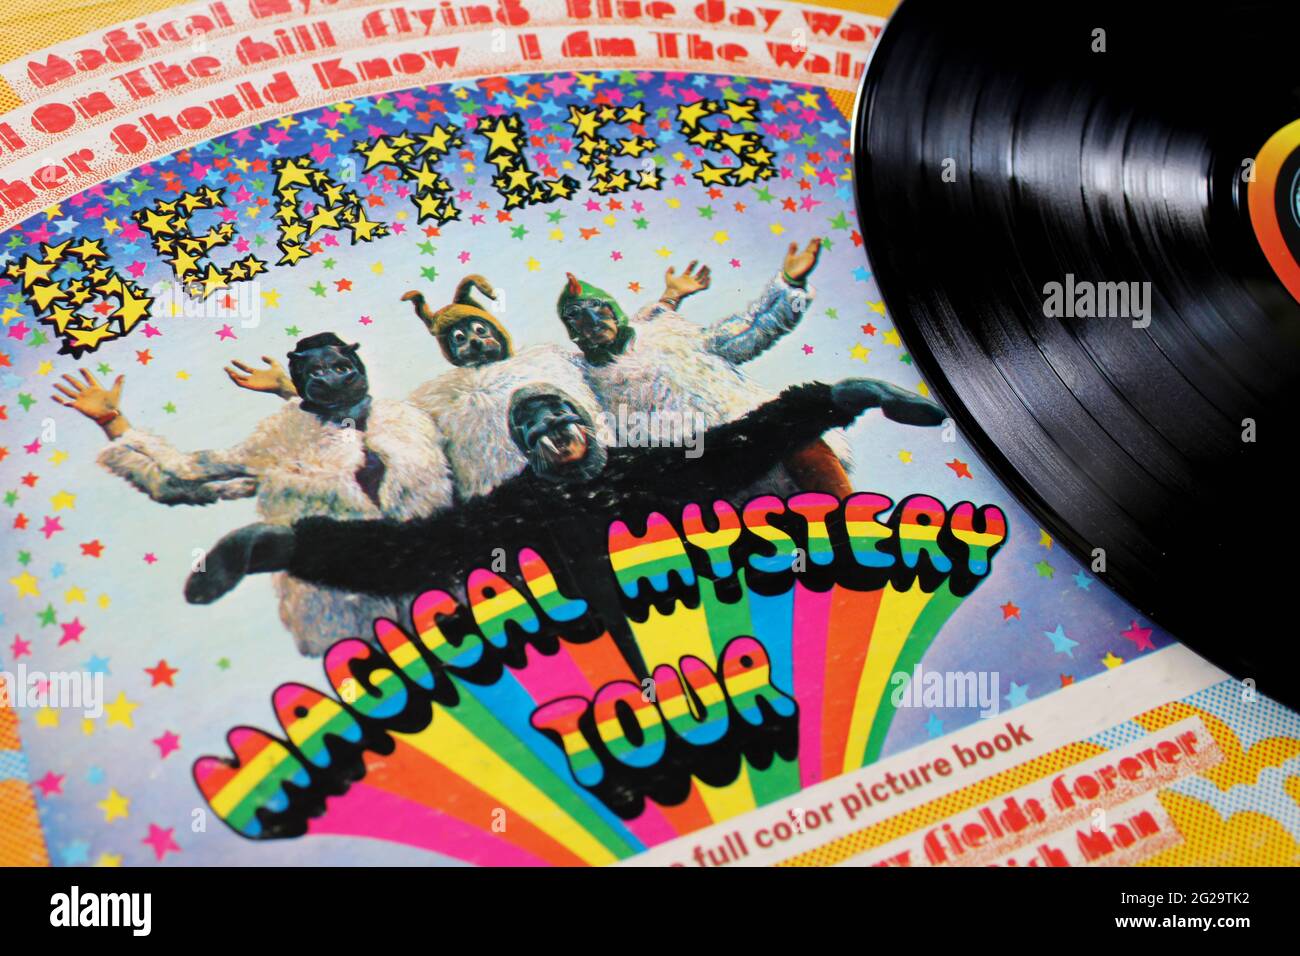 when was the magical mystery tour movie first released